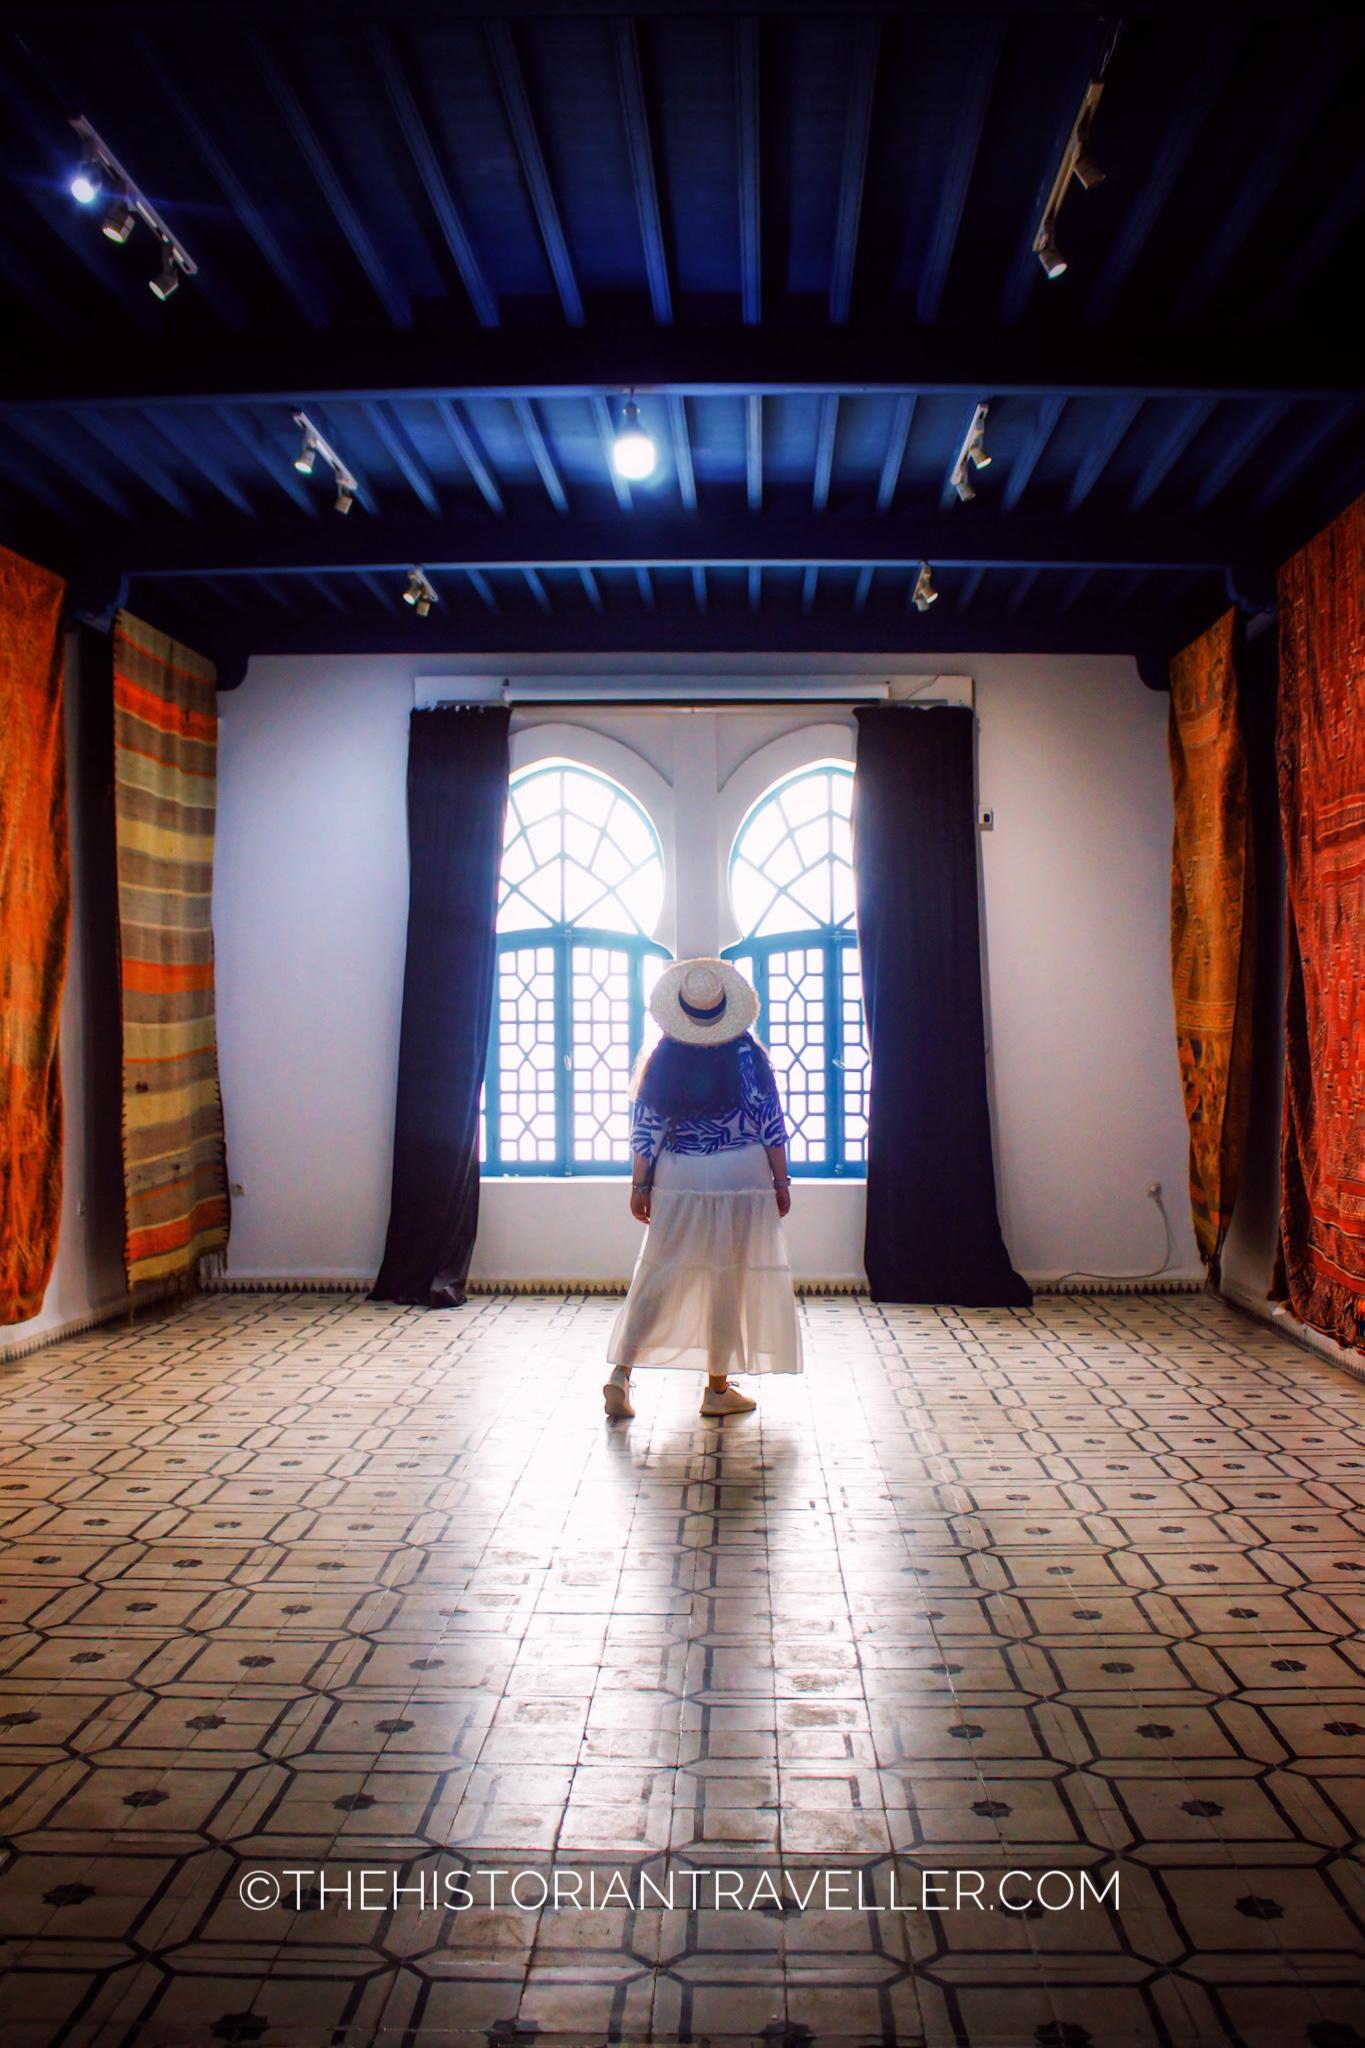 Day trip to Essaouira -  Sidi Mohammed ben Abdallah Museum exhibition